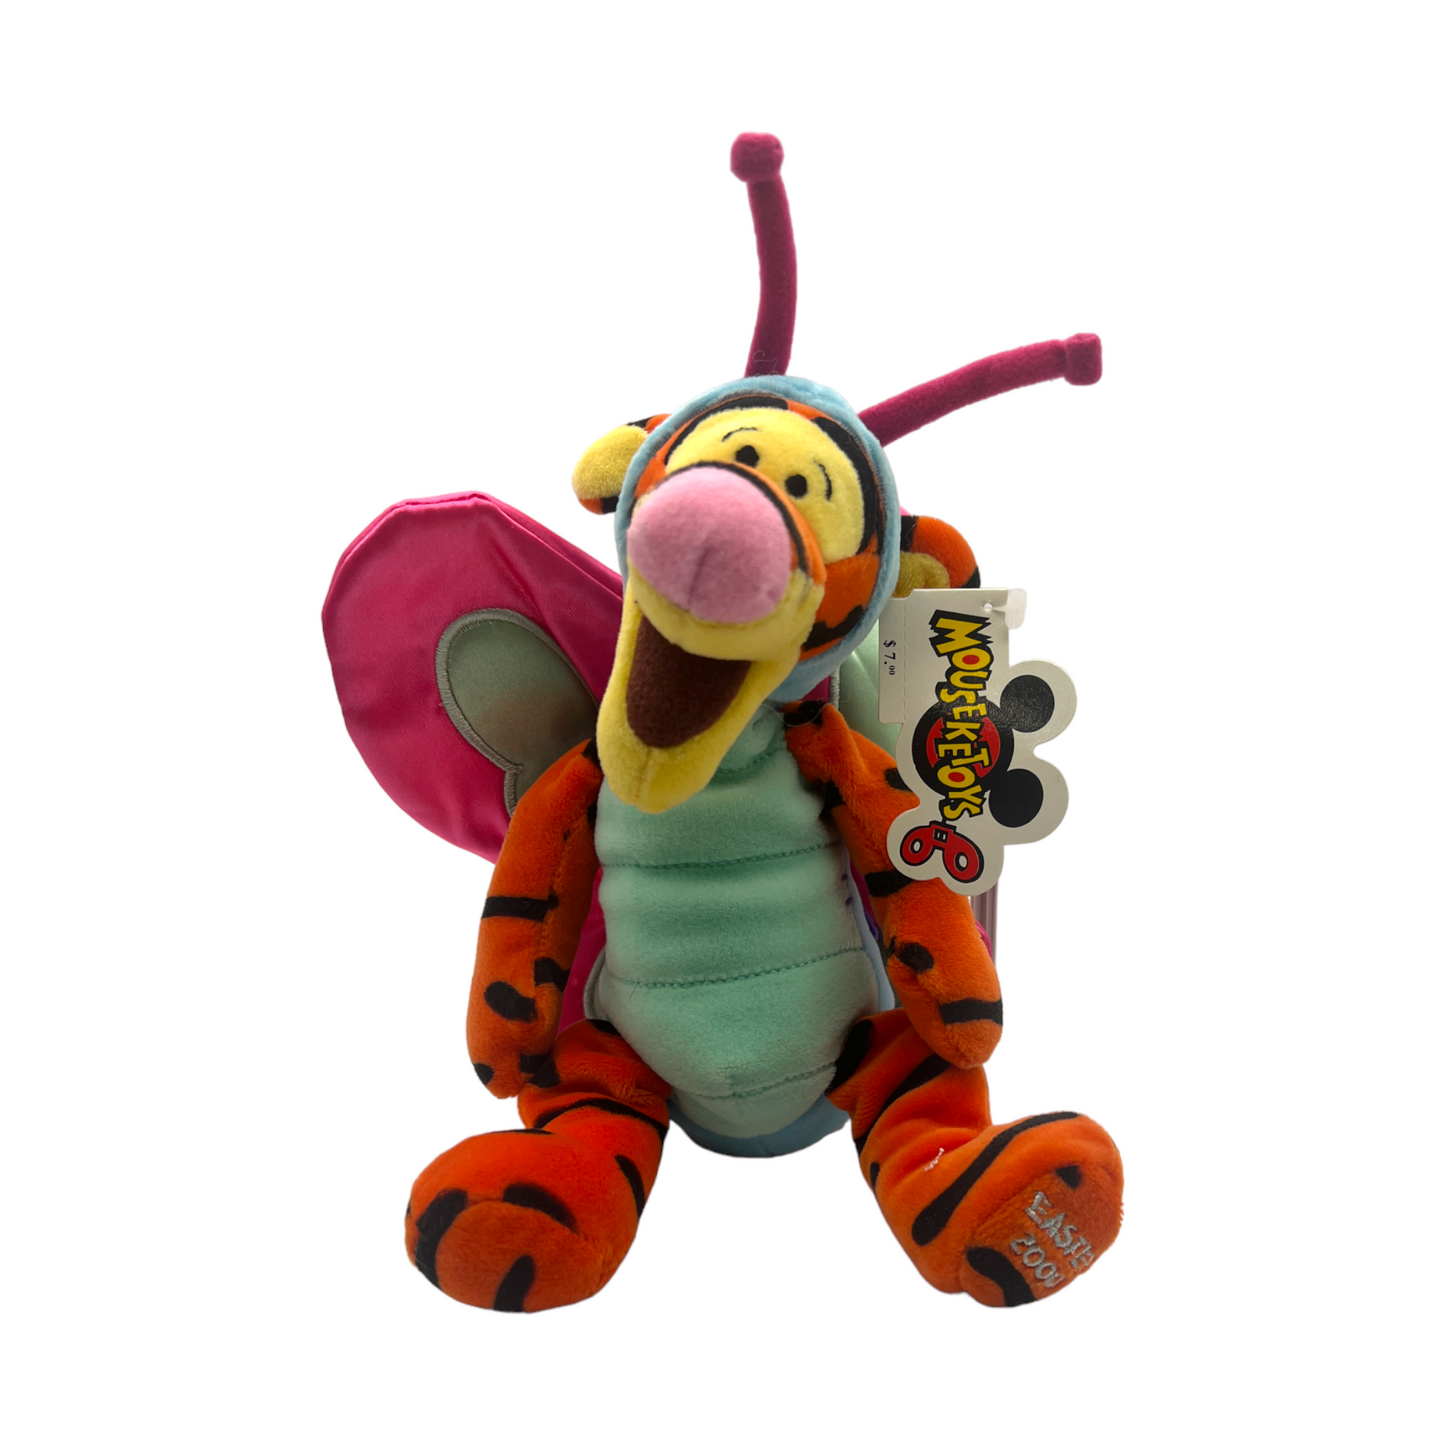 Disney Mouseketoys - Butterfly Tigger Mini Bean Bag - With Tag - 9"